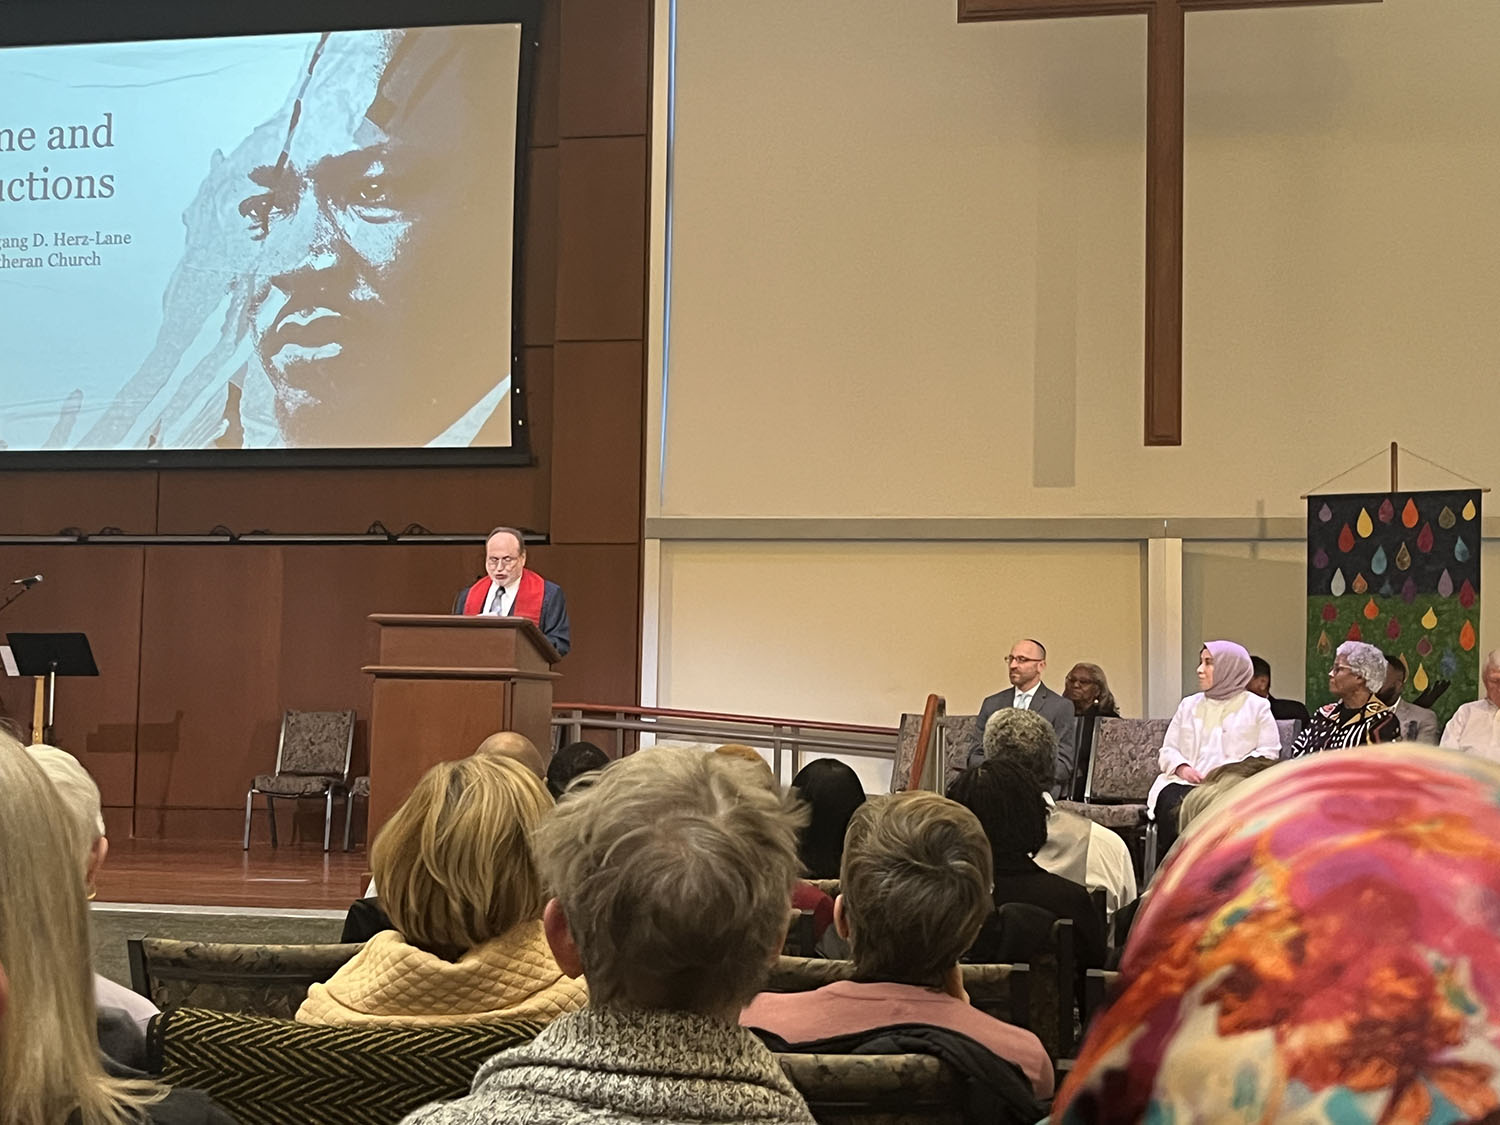 The Martin Luther King Jr. Interfaith Prayer Service was organized by Christ the King Lutheran Church. Divan Center member Meryem Teke gave a short presentation on the five pillars of Islam and guests were served Noah's pudding, a sign of diversity, prepared by Divan Center volunteers.